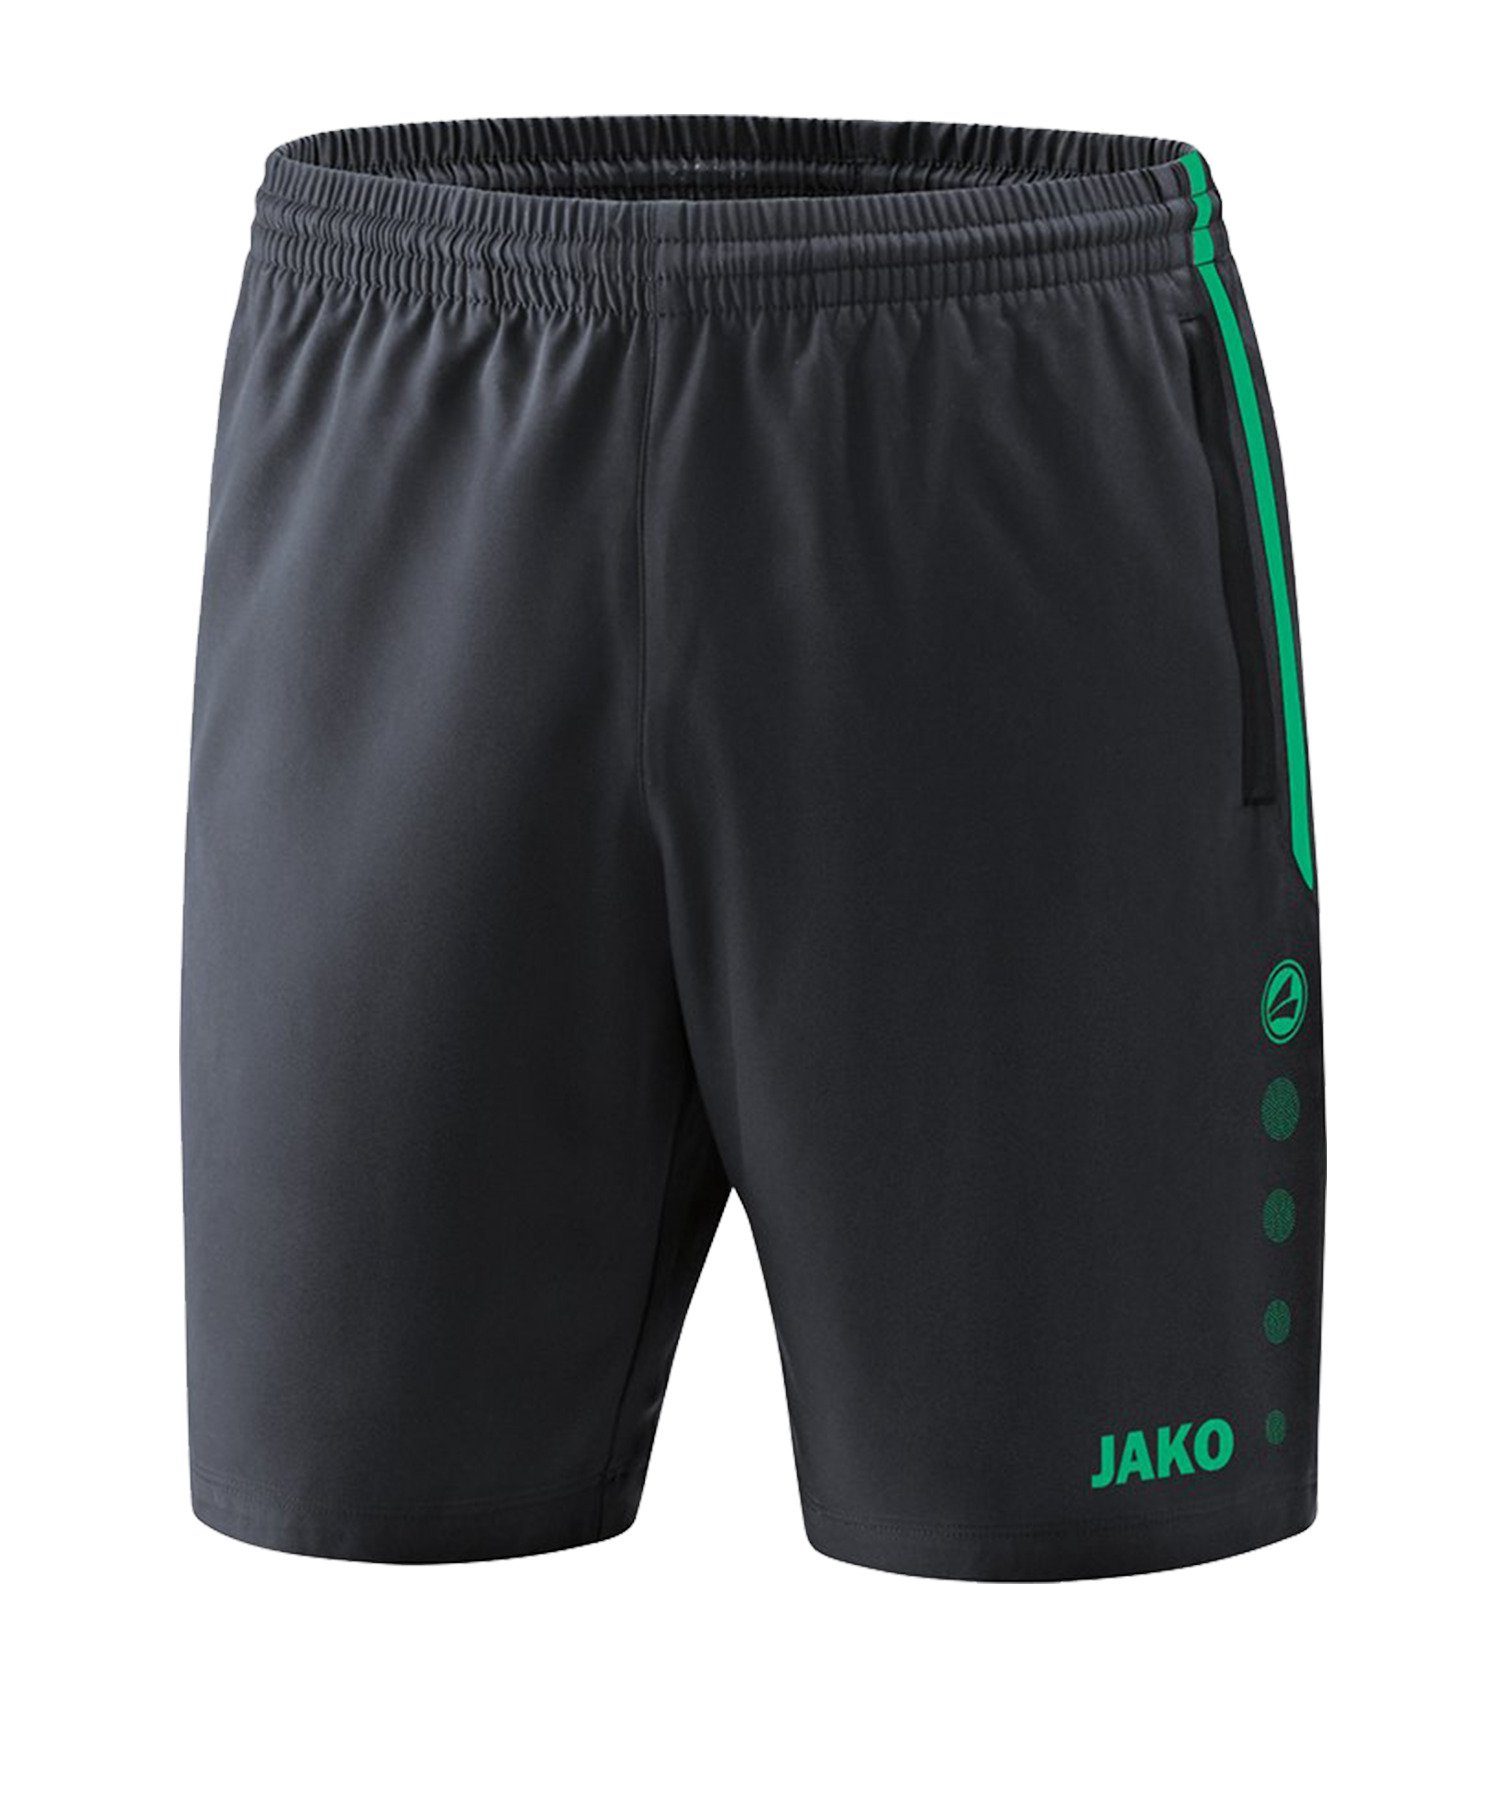 Short Sporthose Jako Grautuerkis Competition 2.0